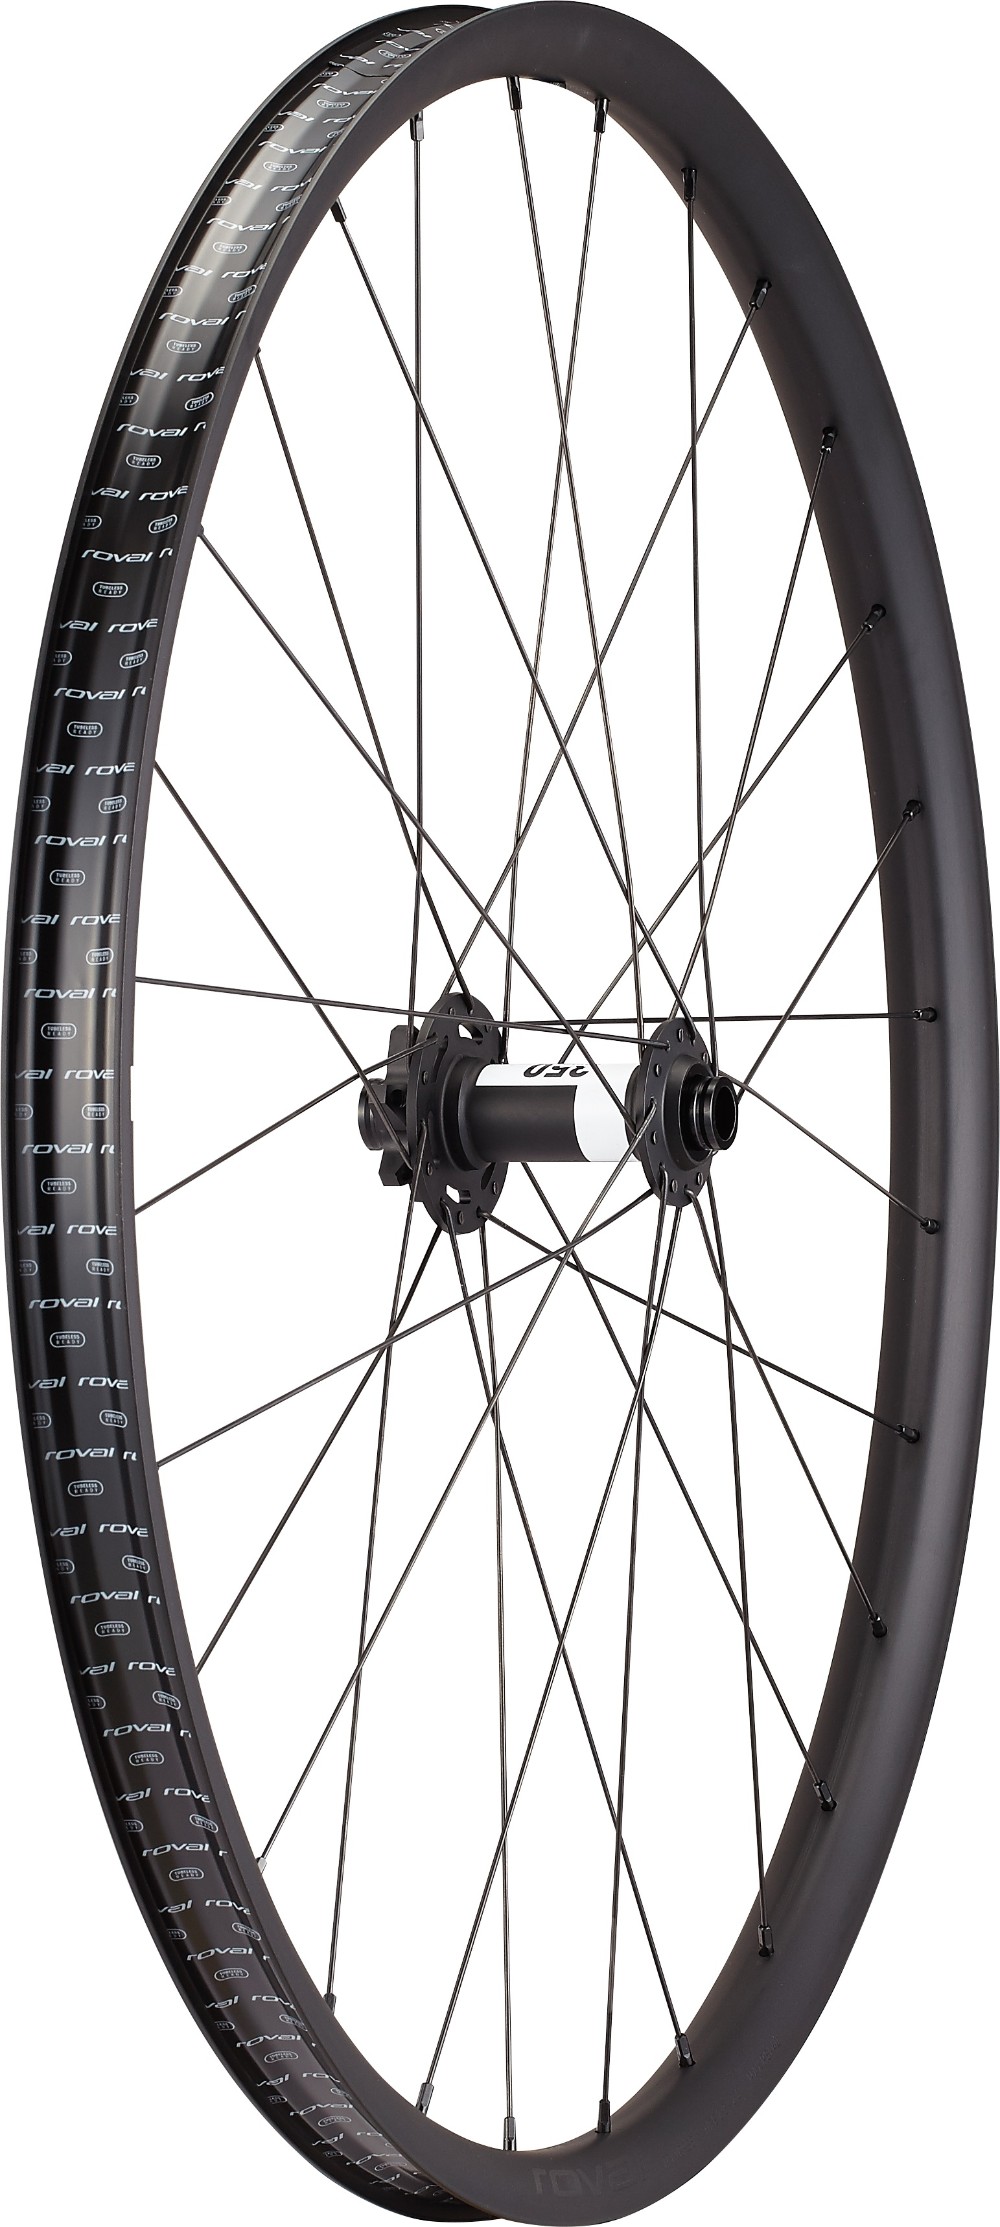 Traverse Alloy 350 29 Front Wheel image 0